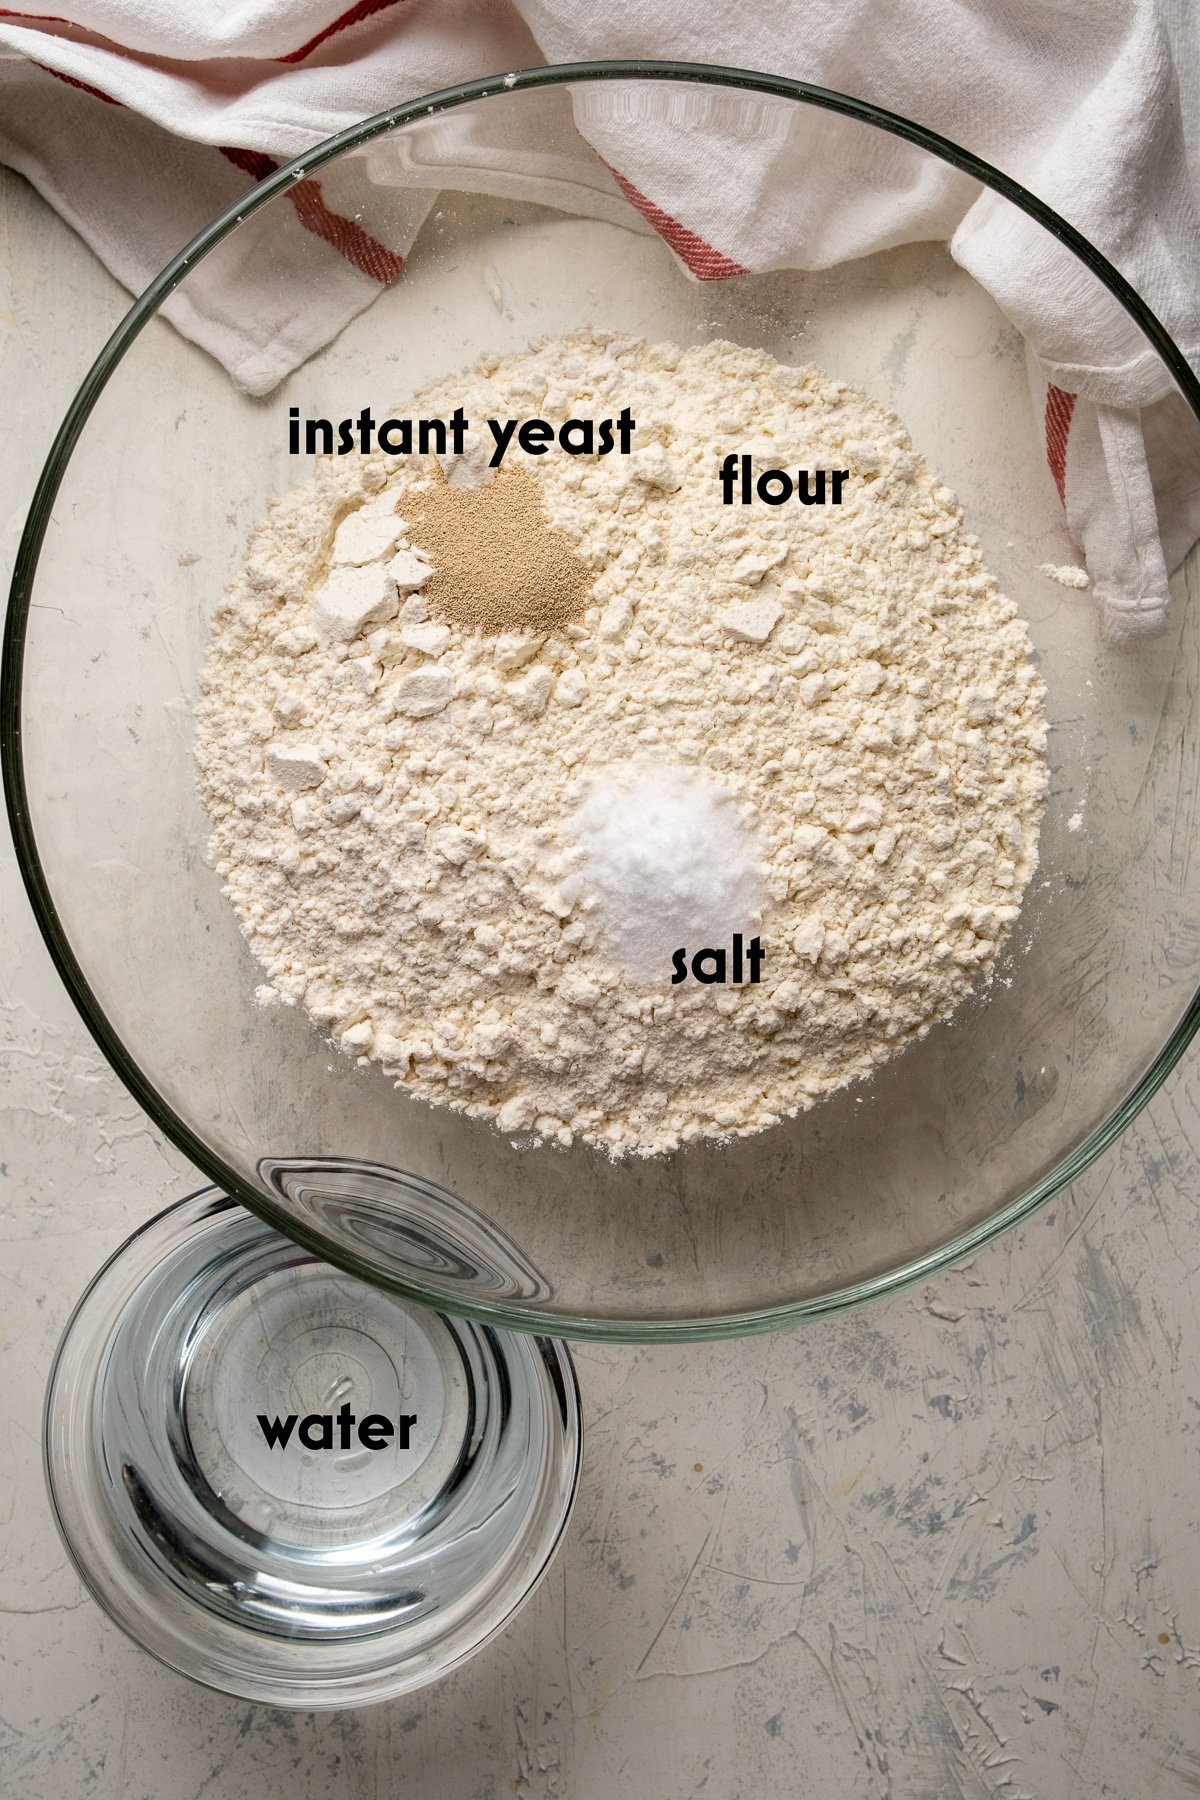 Flour, instant yeast and salt in a large glass bowl and water in a smaller bowl on the side on a light background.